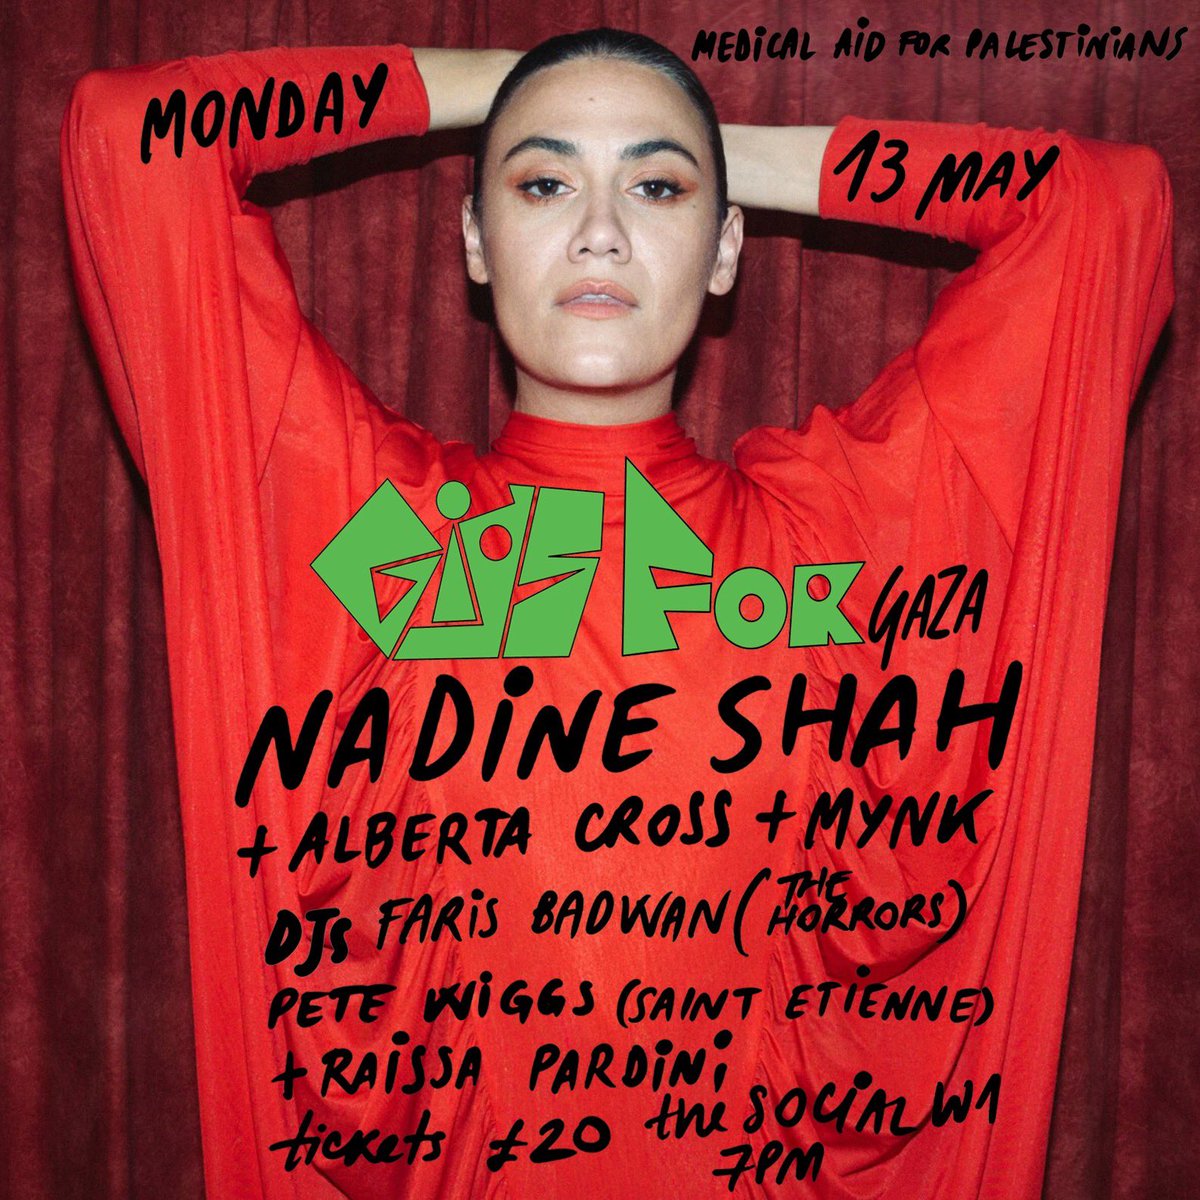 So great listening to @nadineshah this morning on @BBC6Music with @laurenlaverne 📻 We love Nadine & her new album ‘Filthy Underneath’ is a banger! Catch her on Monday at @thesocial at the next Gig for Gaza, raising funds for @MedicalAidPal ❤️